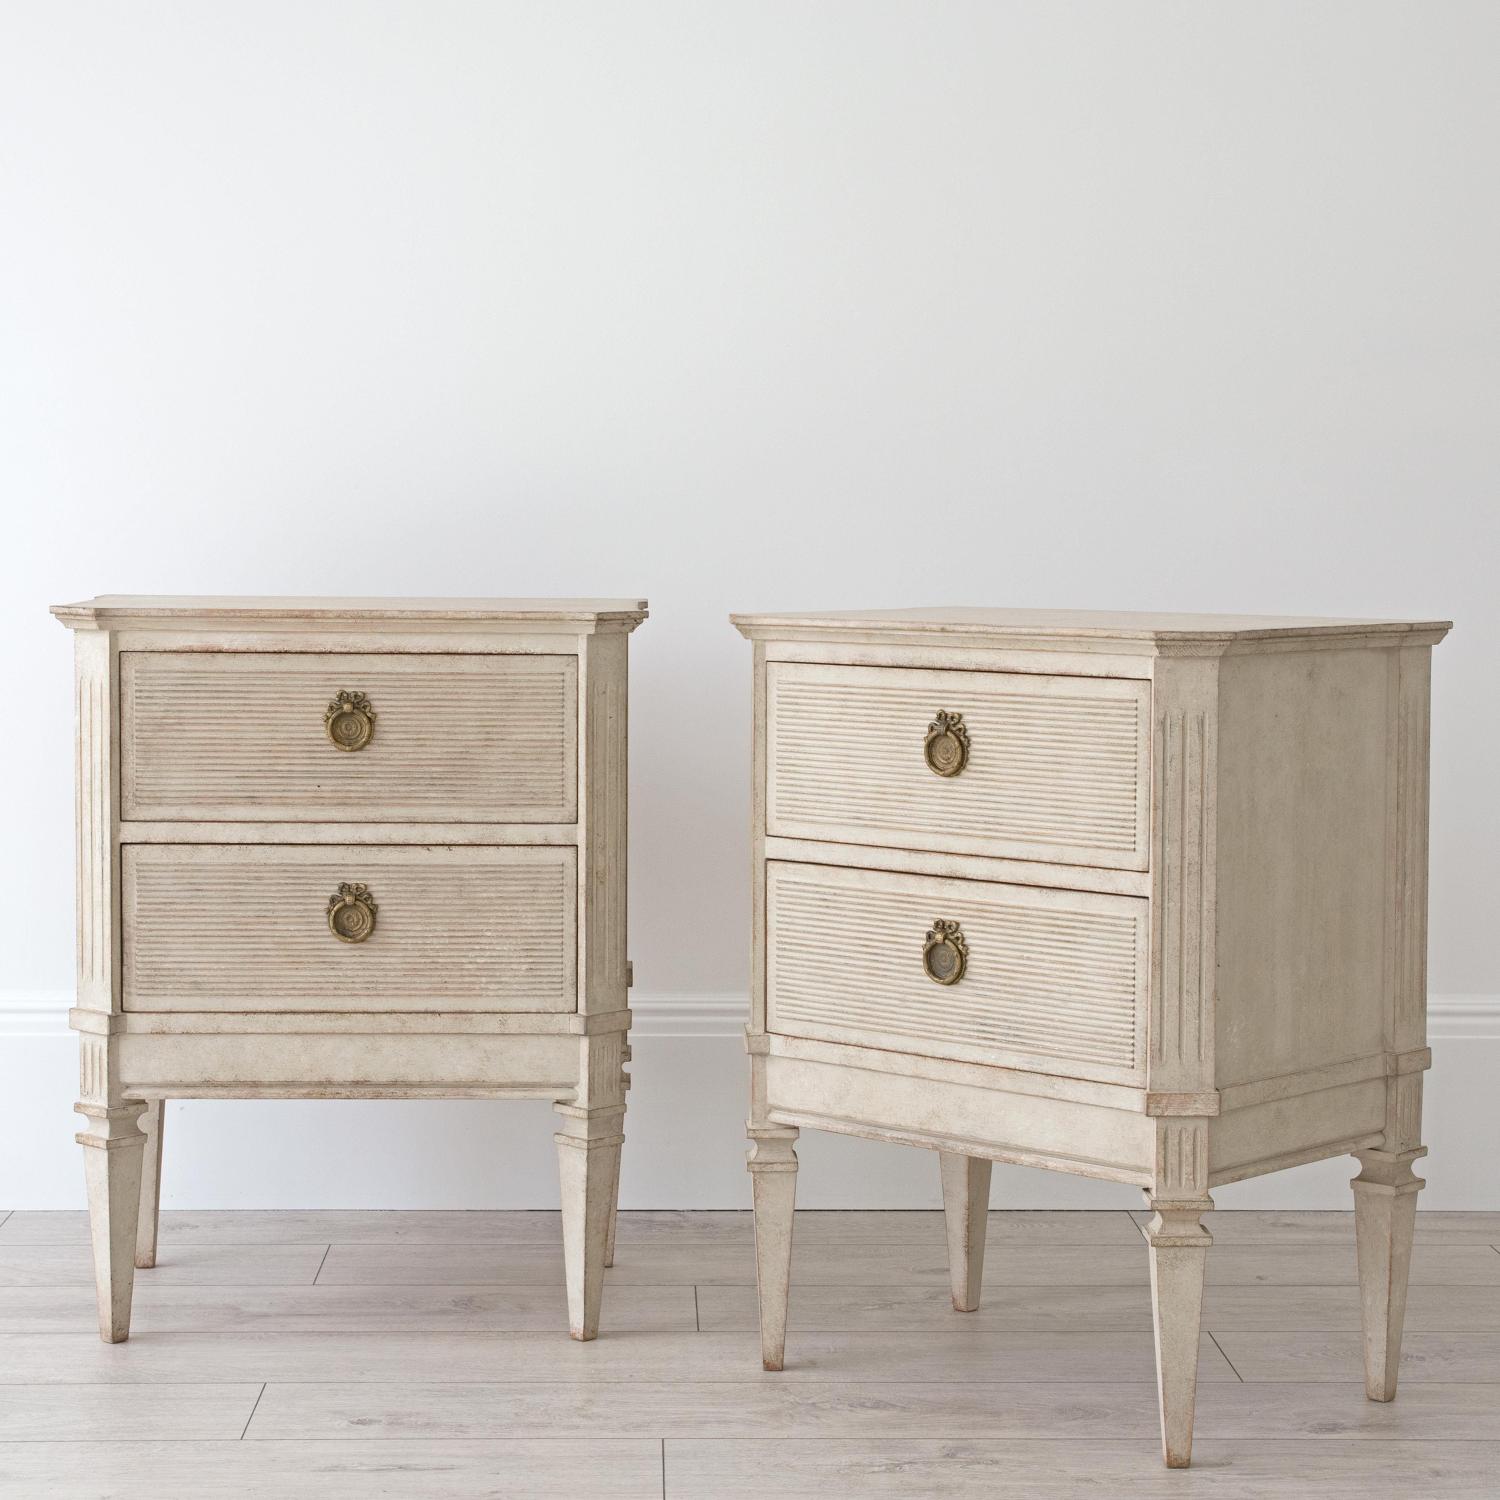 PAIR OF BESPOKE BEDSIDE CHESTS